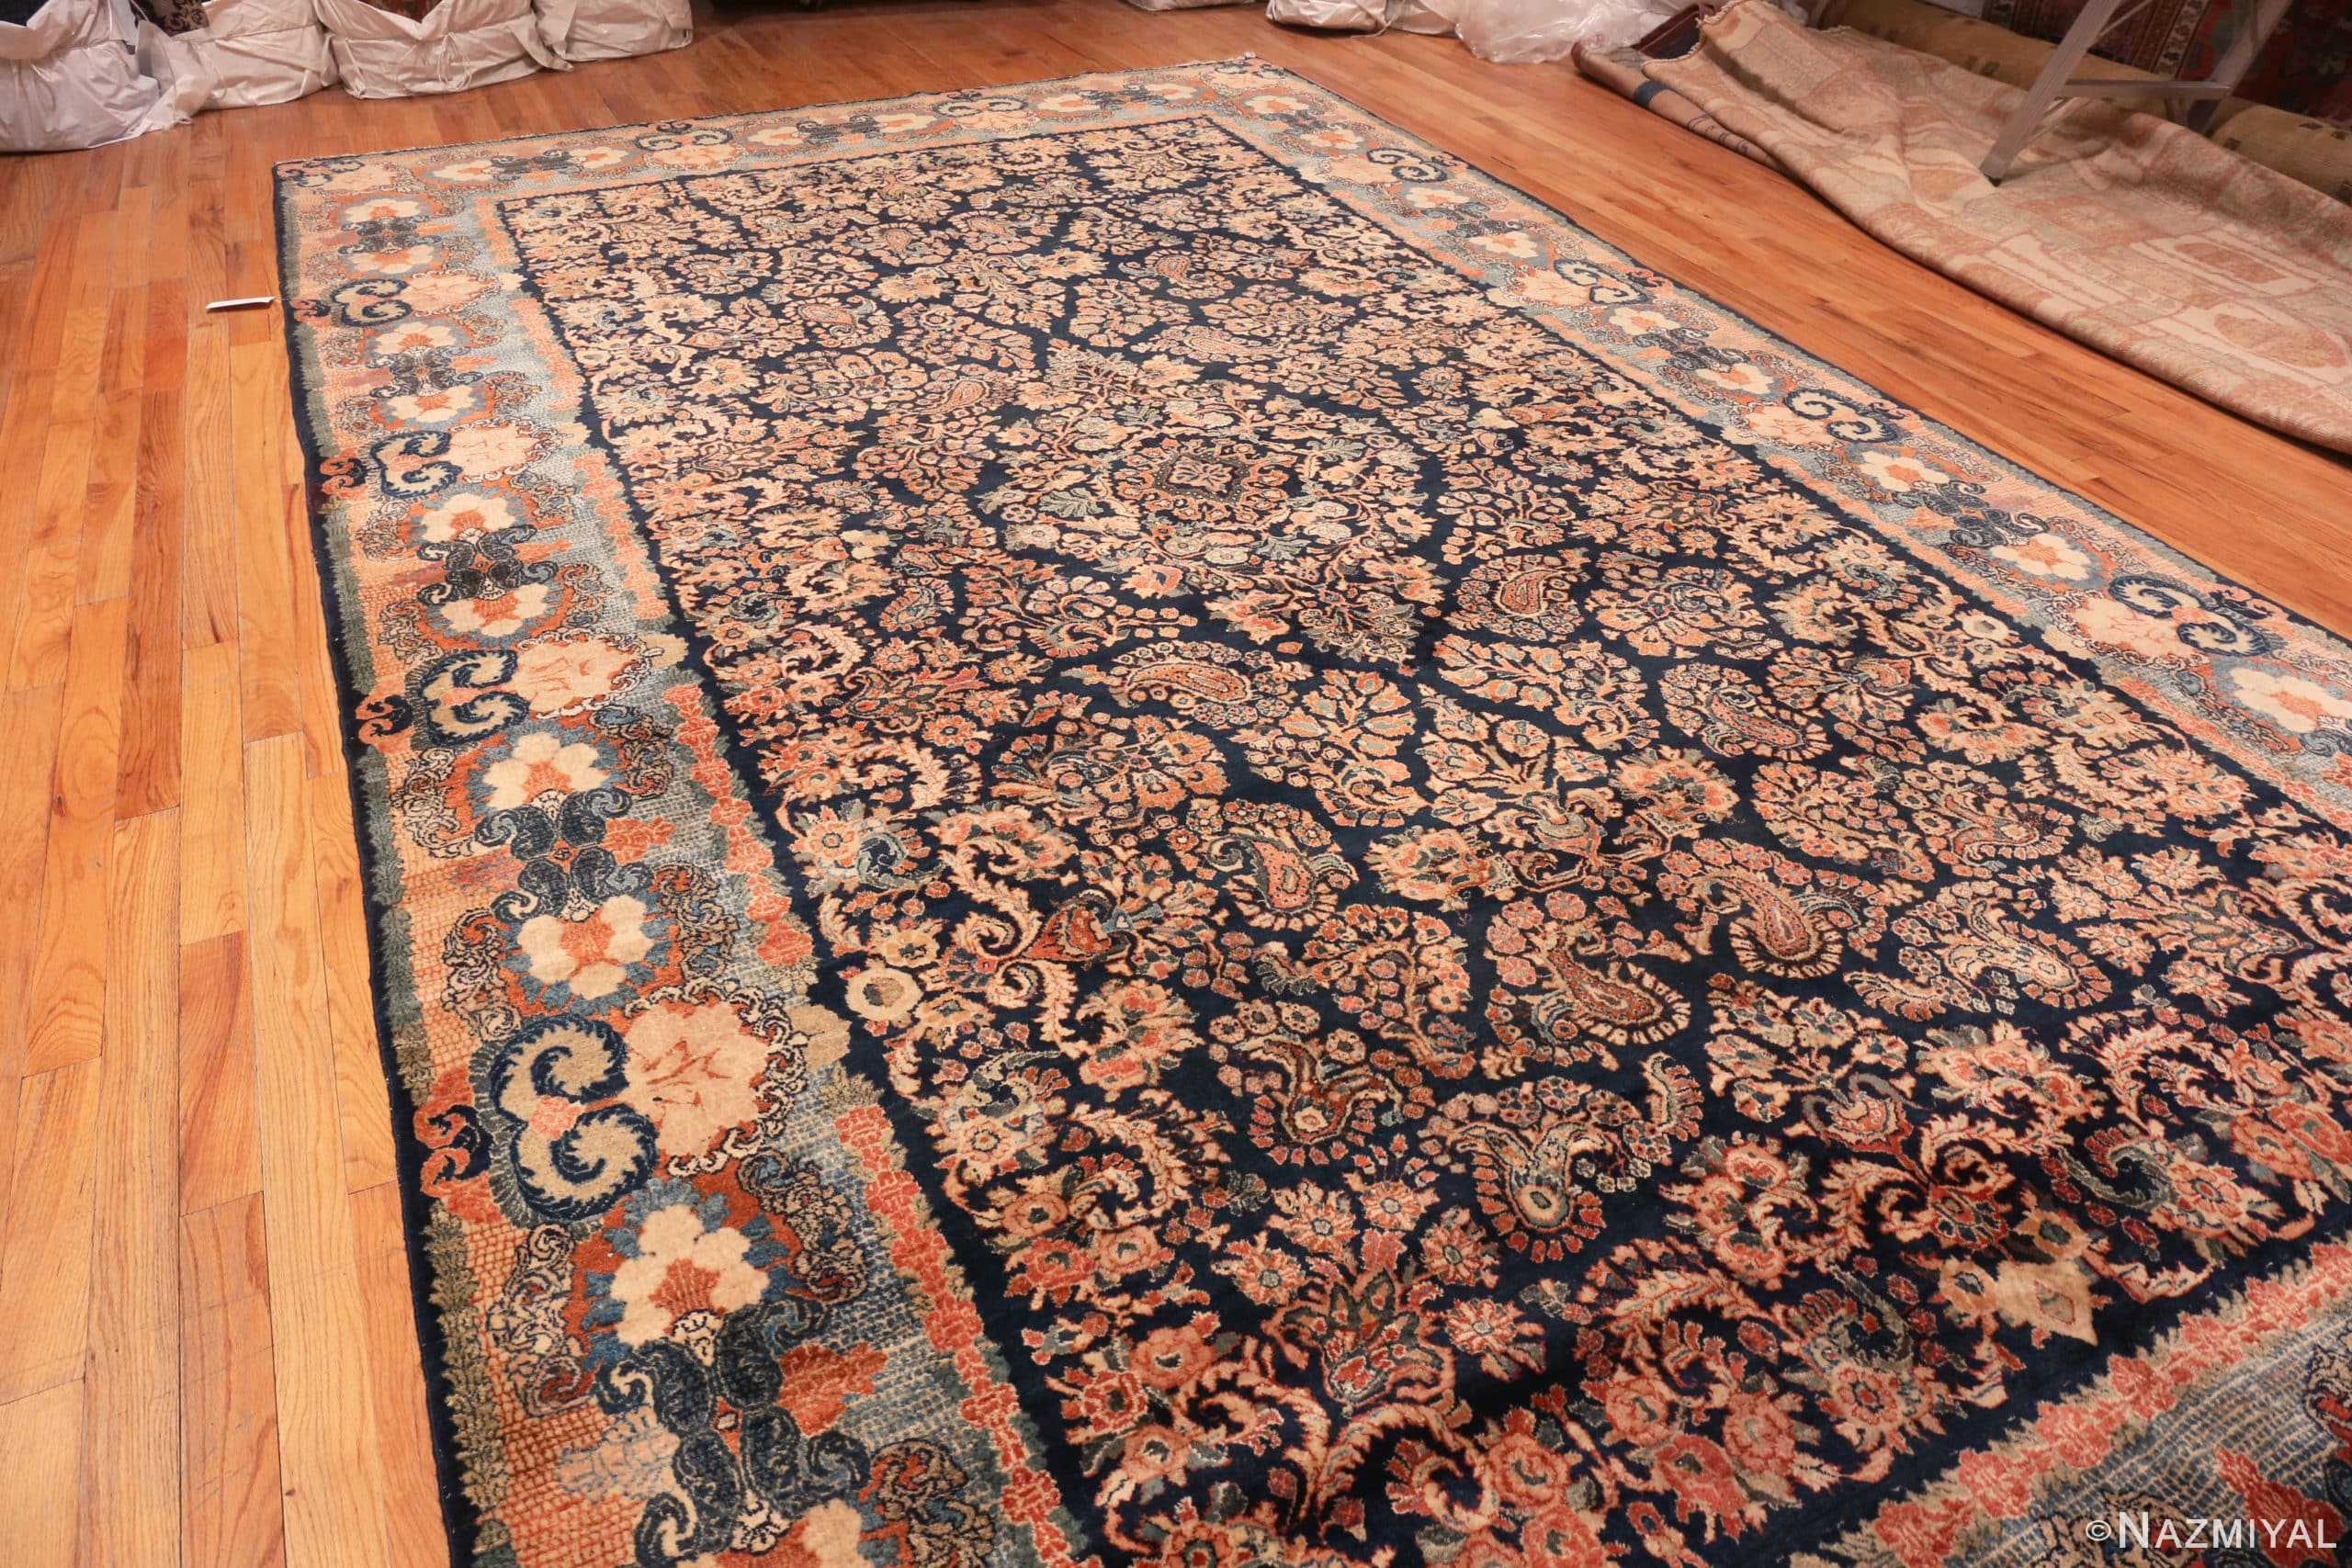 Whole View Of Large Floral Antique Persian Sarouk Rug 70814 by Nazmiyal Antique Rugs